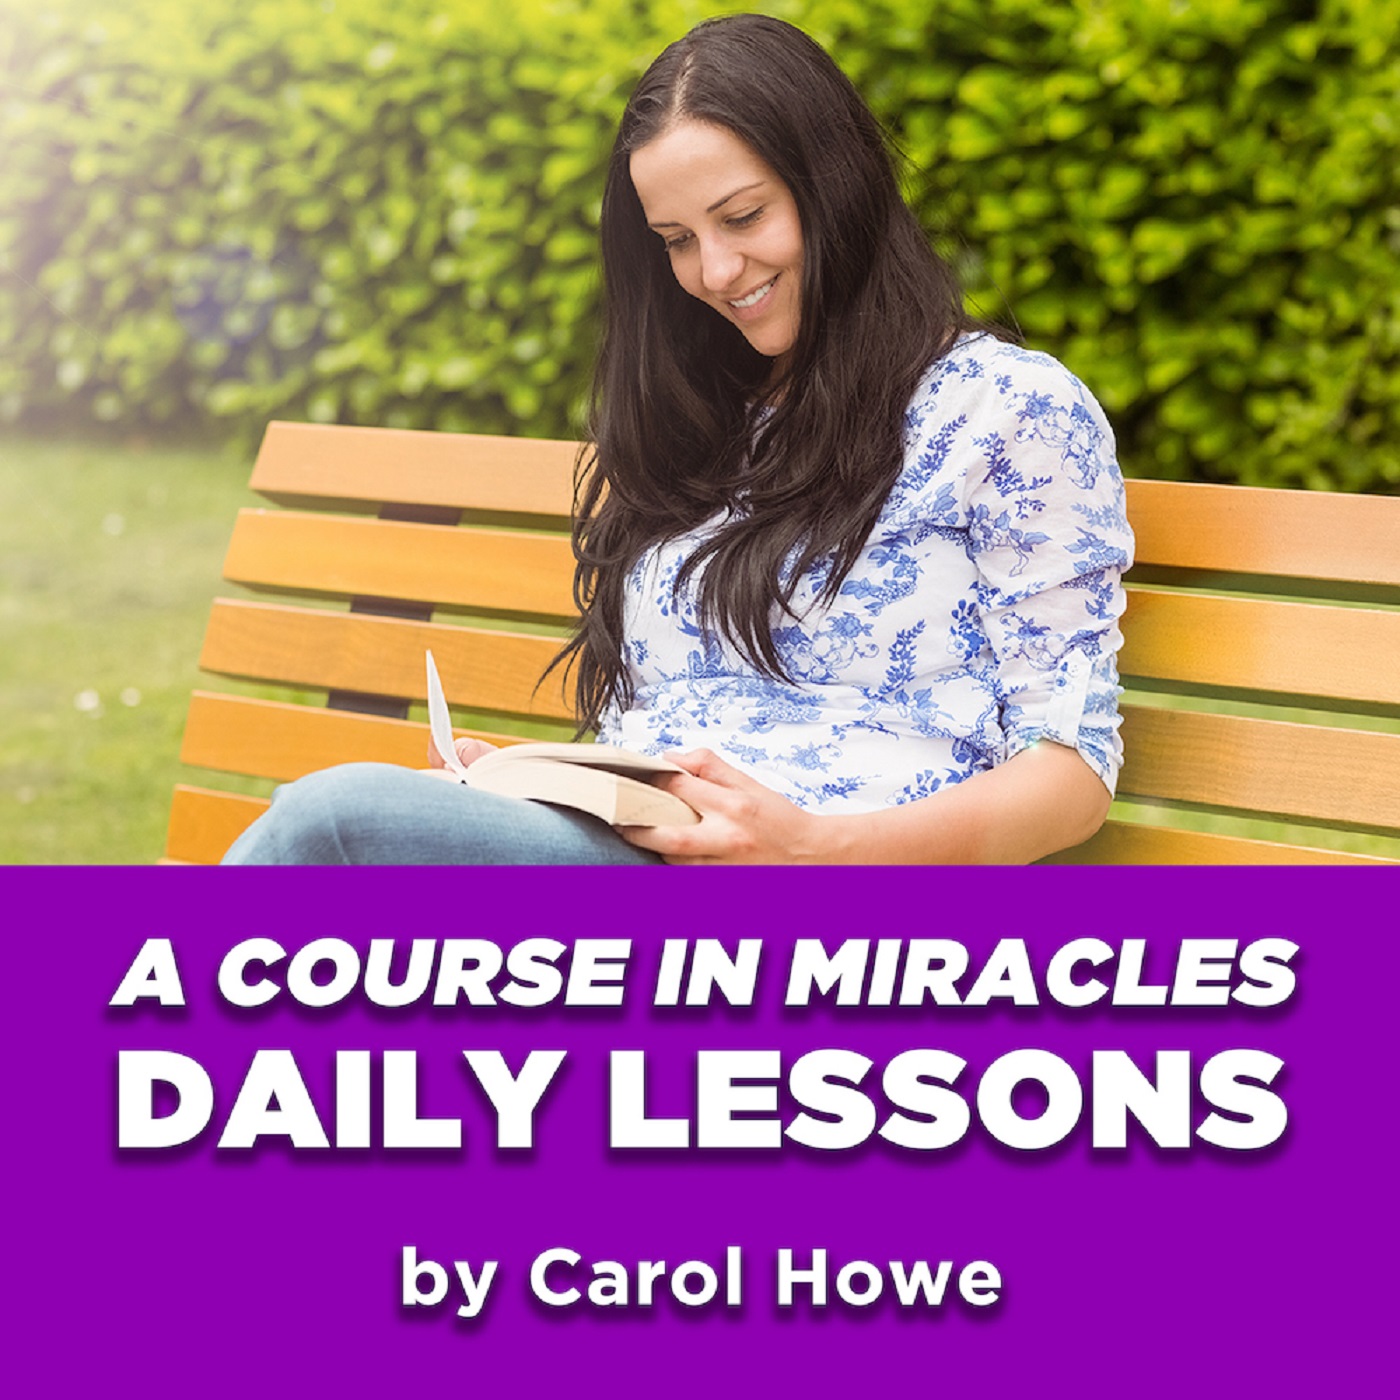 A Course In Miracles - Lesson 353